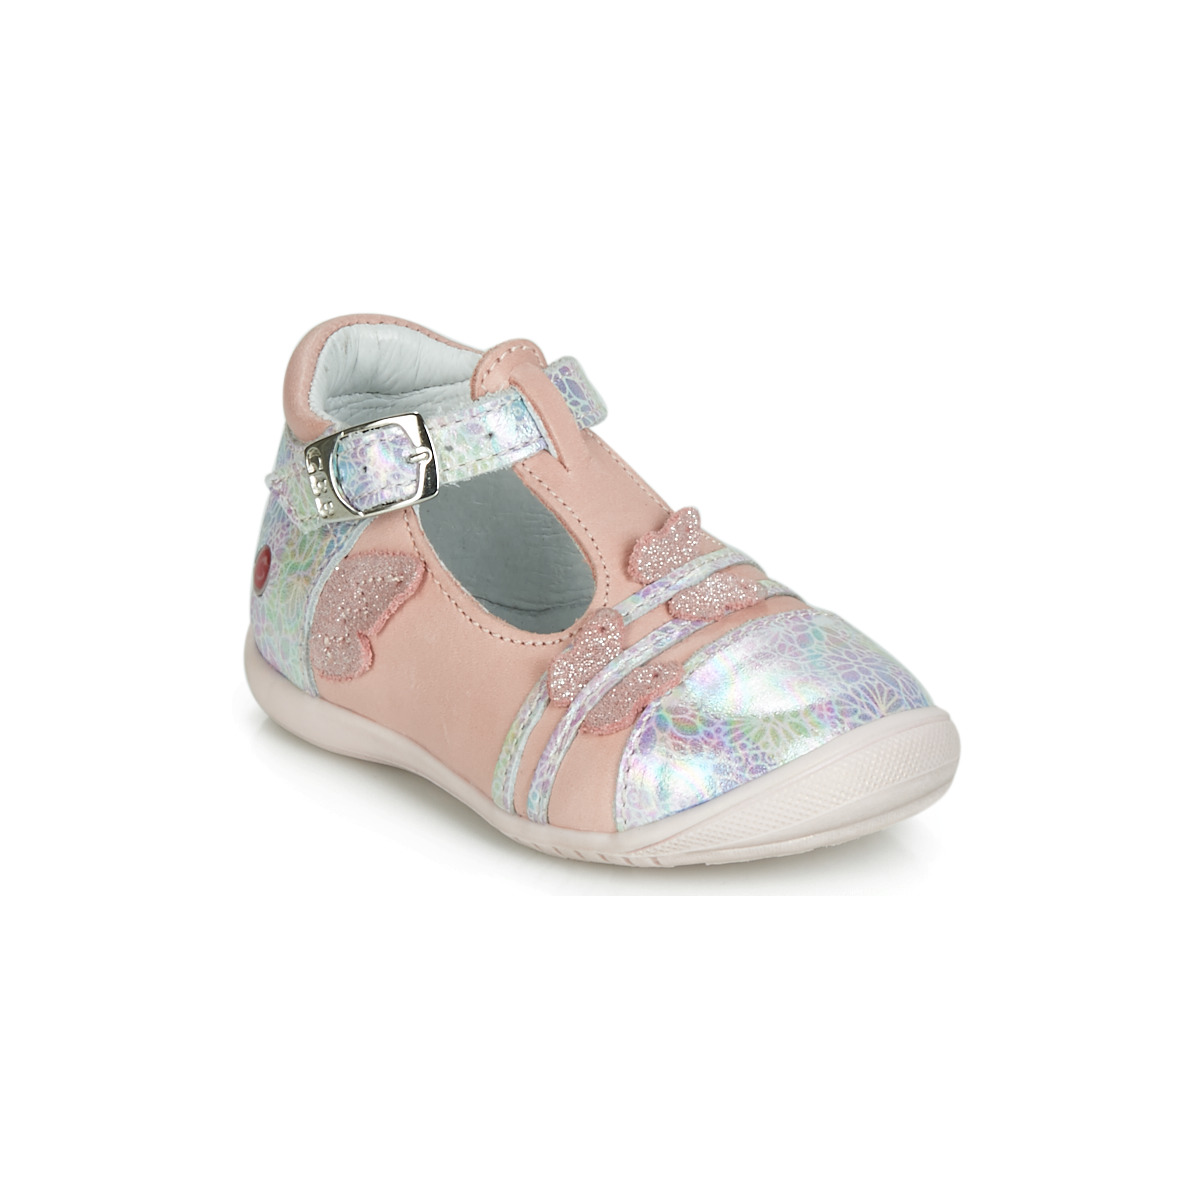 Shoes Girl Flat shoes GBB MERTONE Pink / Silver